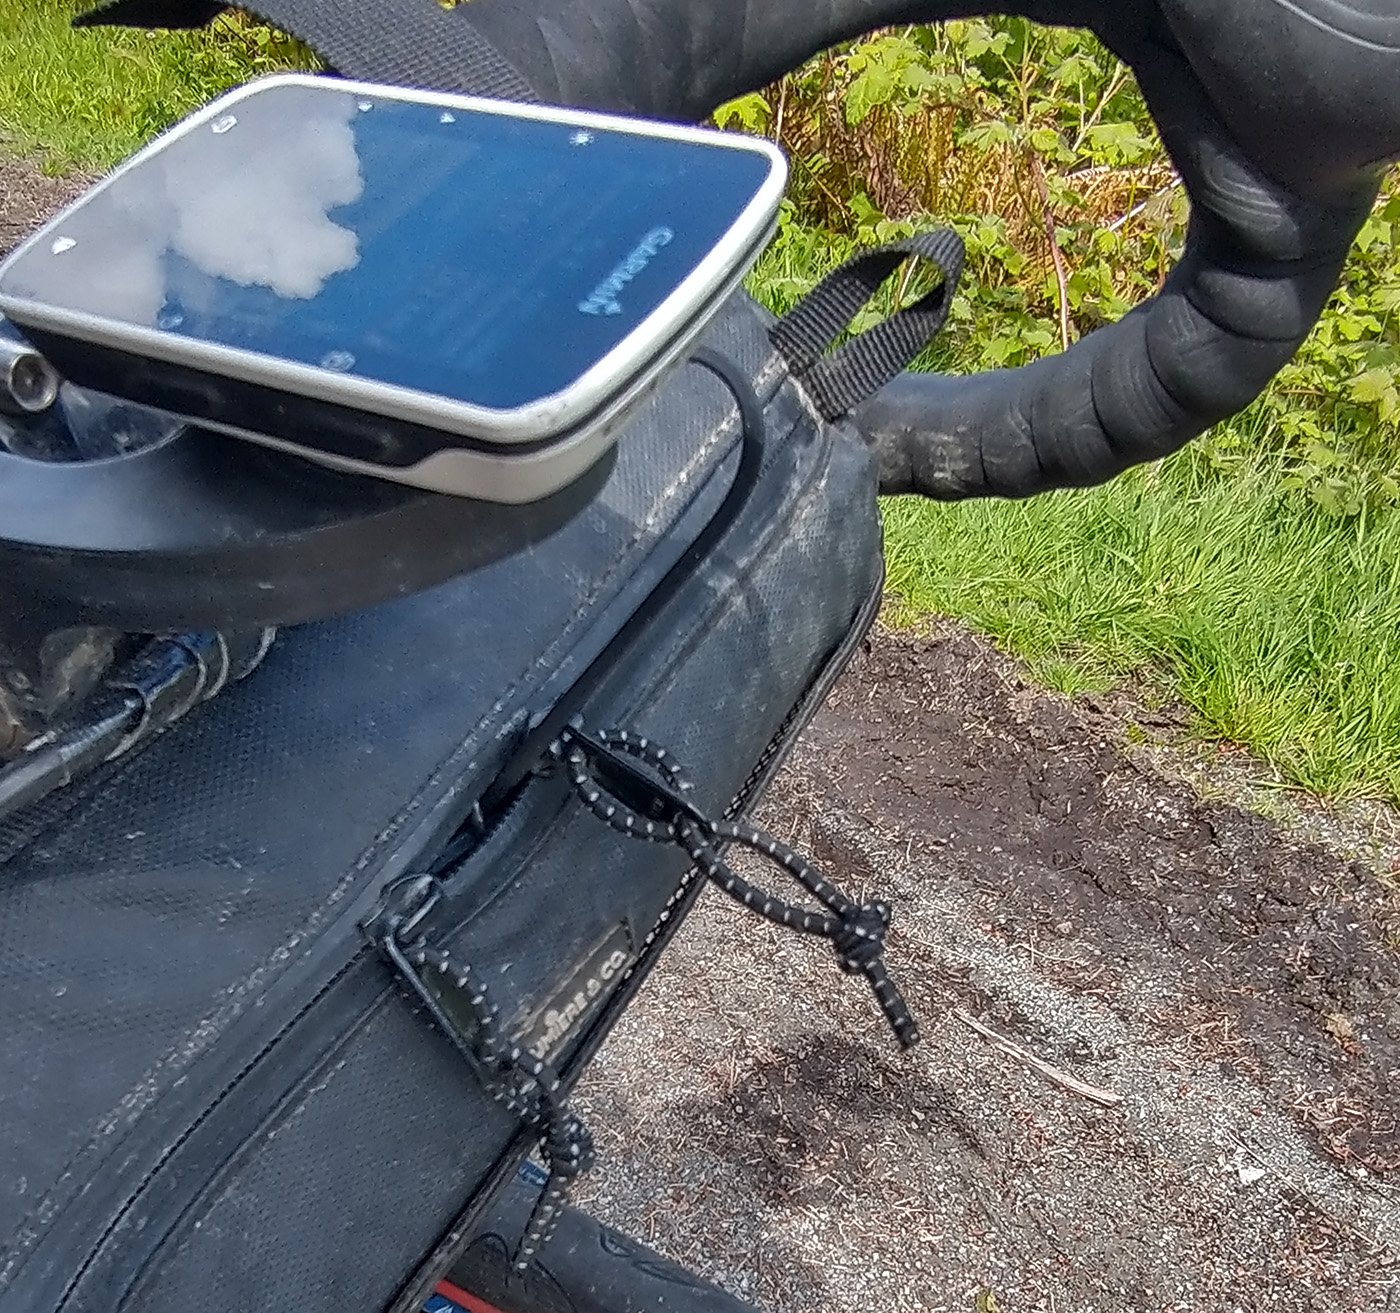 Can plug the phone or Garmin into it. Sometimes rides are so long the Garmin dies.